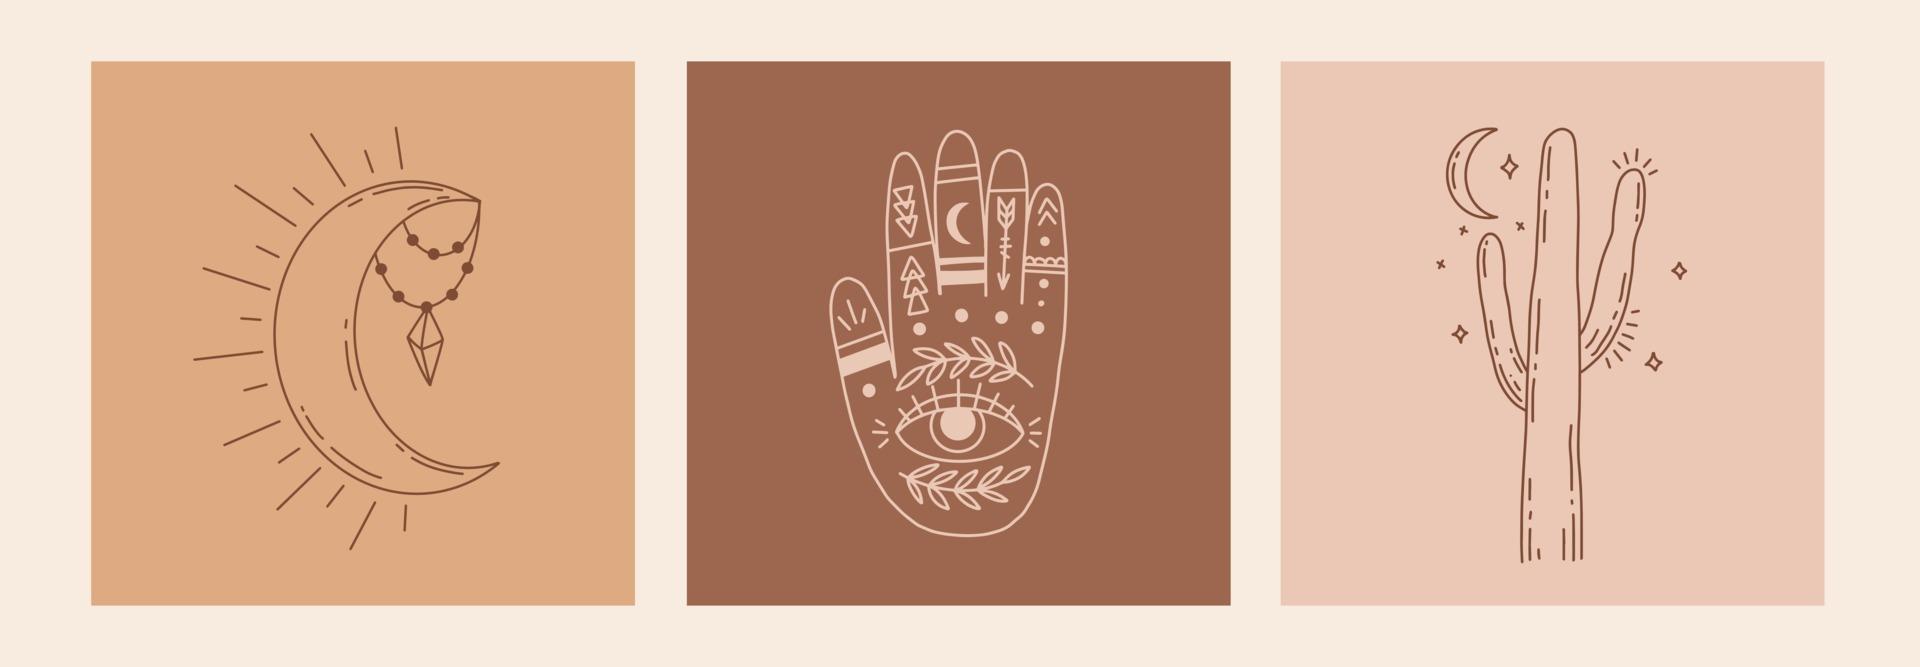 Boho mystic doodle esoteric set. Magic line art poster with hands, cactus, moon and stars. Bohemian modern vector illustration